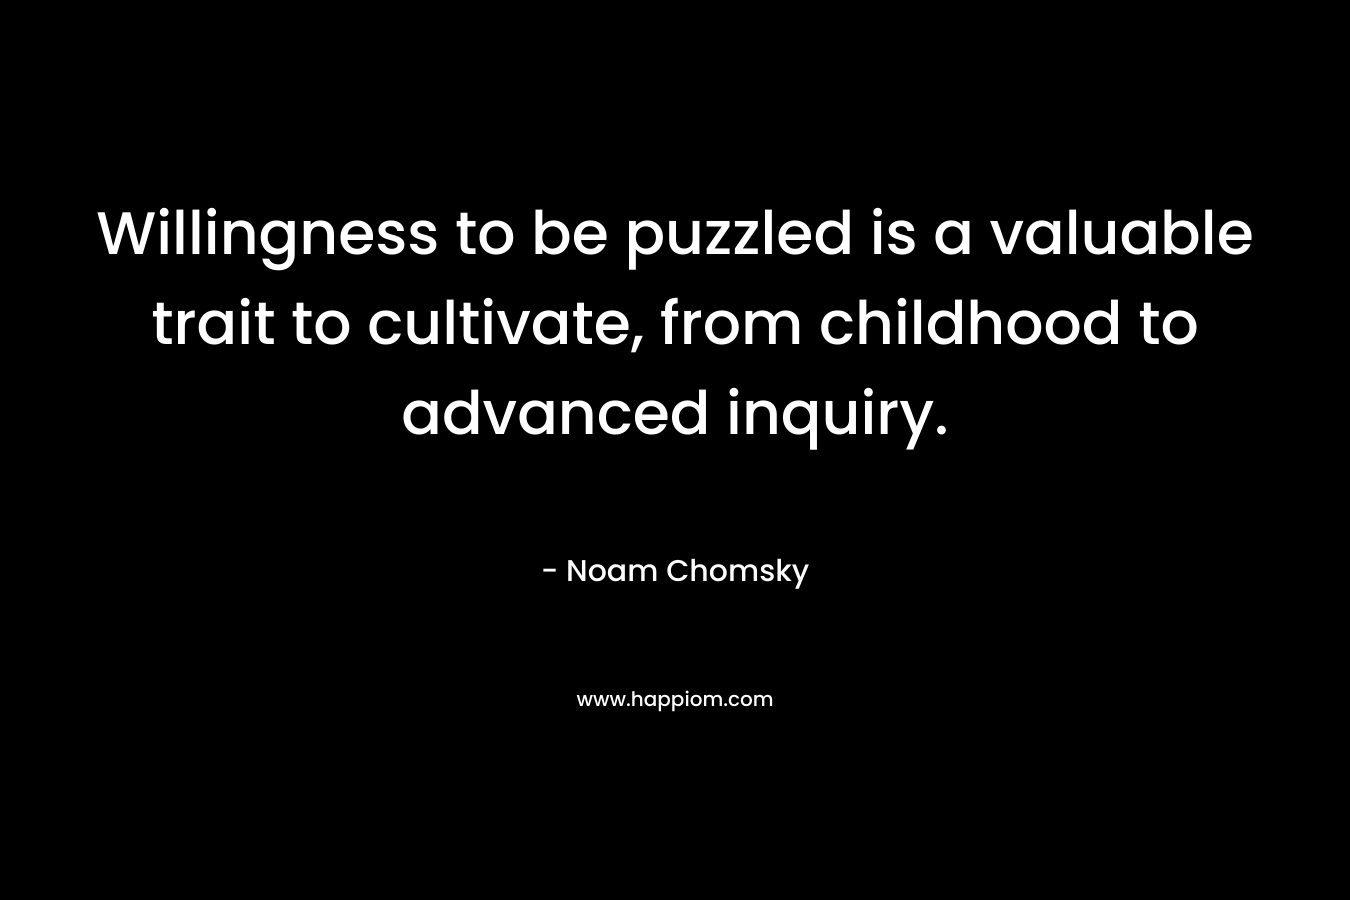 Willingness to be puzzled is a valuable trait to cultivate, from childhood to advanced inquiry. – Noam Chomsky